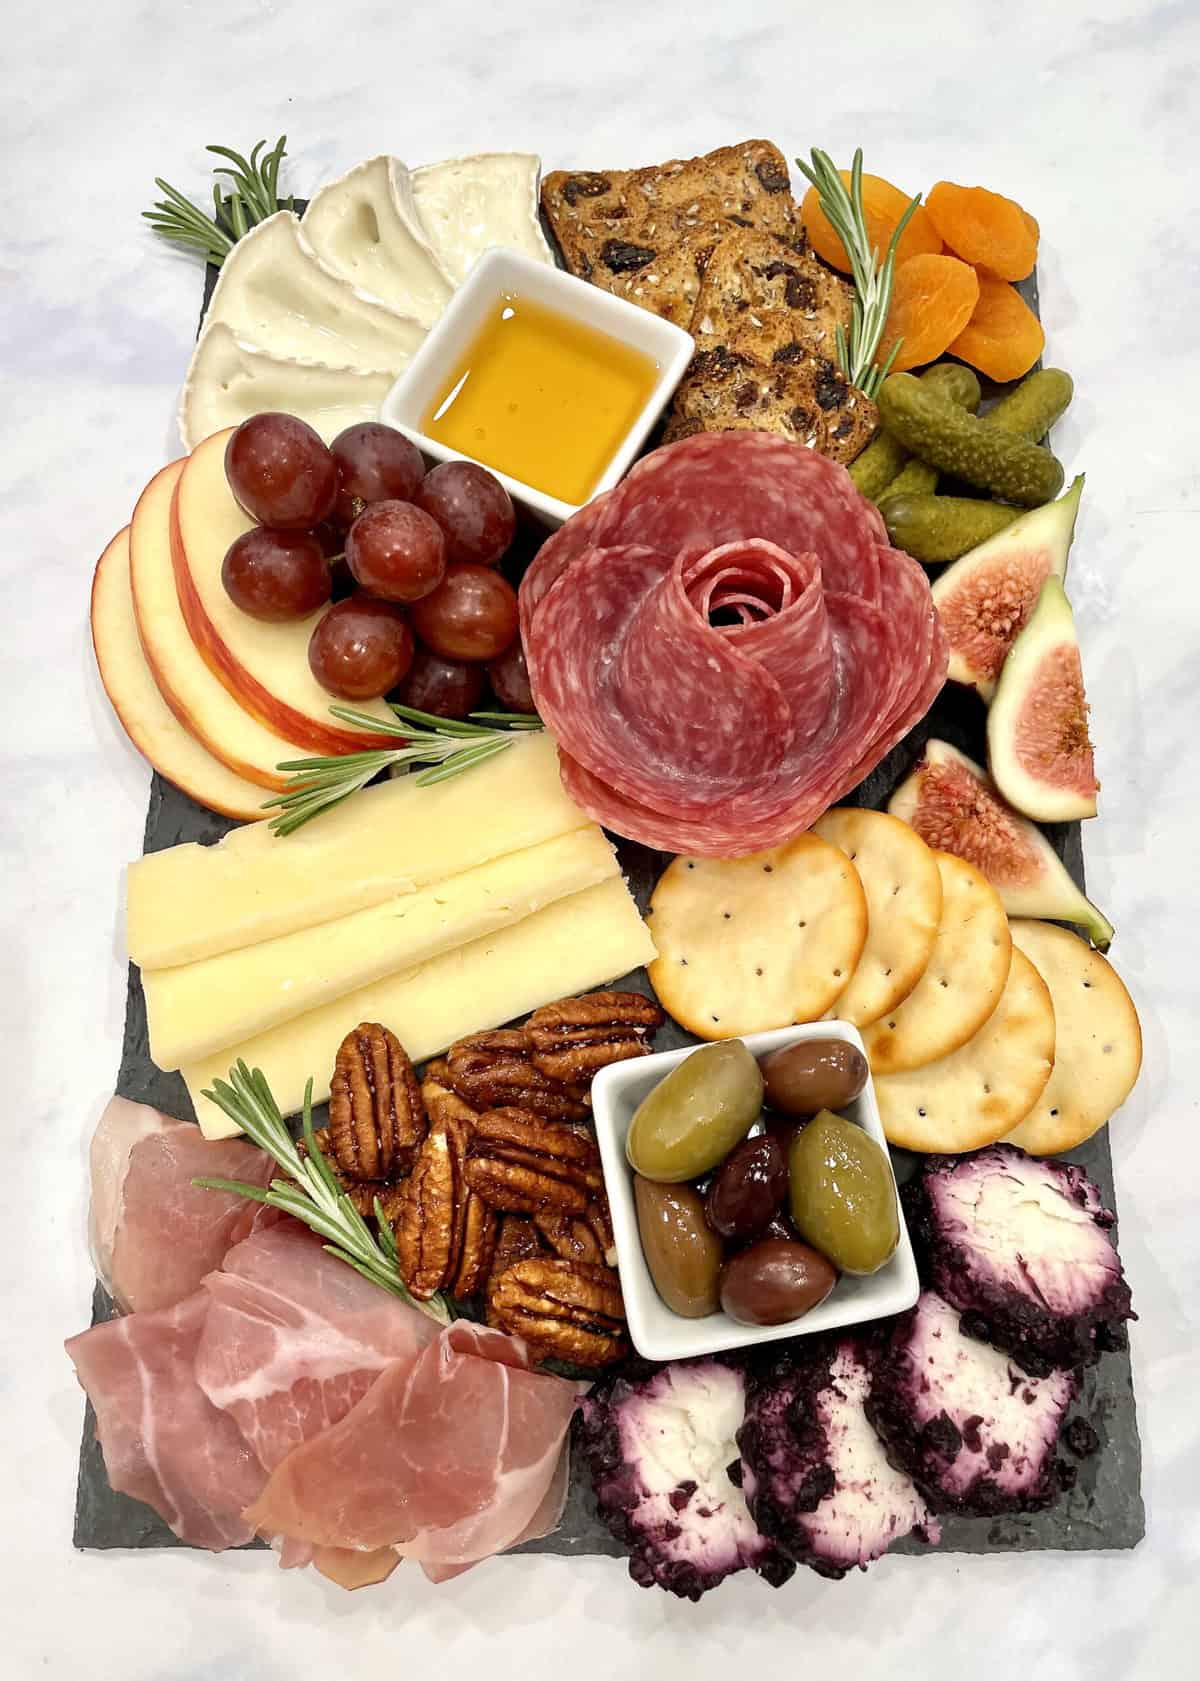 Mini Trader Joe's Cheese and Charcuterie Board by The BakerMama